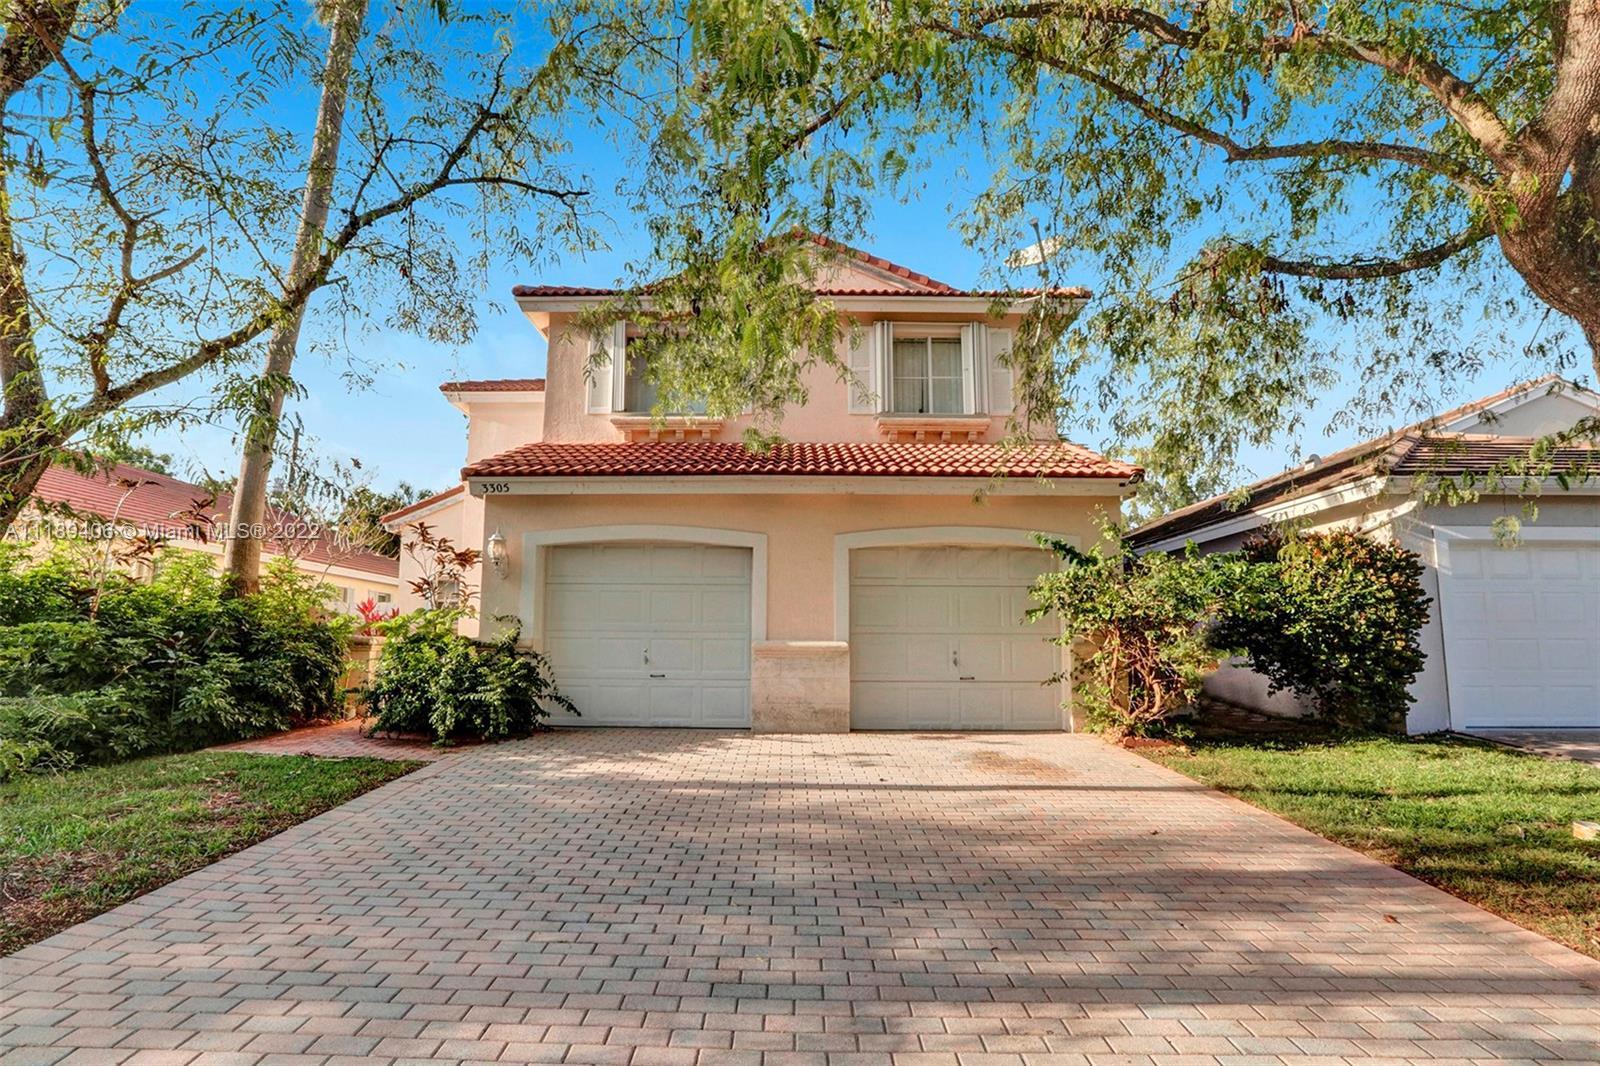 TWO-STORY 4 BEDROOMS 2 1/2 BATHROOMS OVER 2,000SF HOME IN THE DESIRABLE GATED COMMUNITY OF OAKRIDGE.